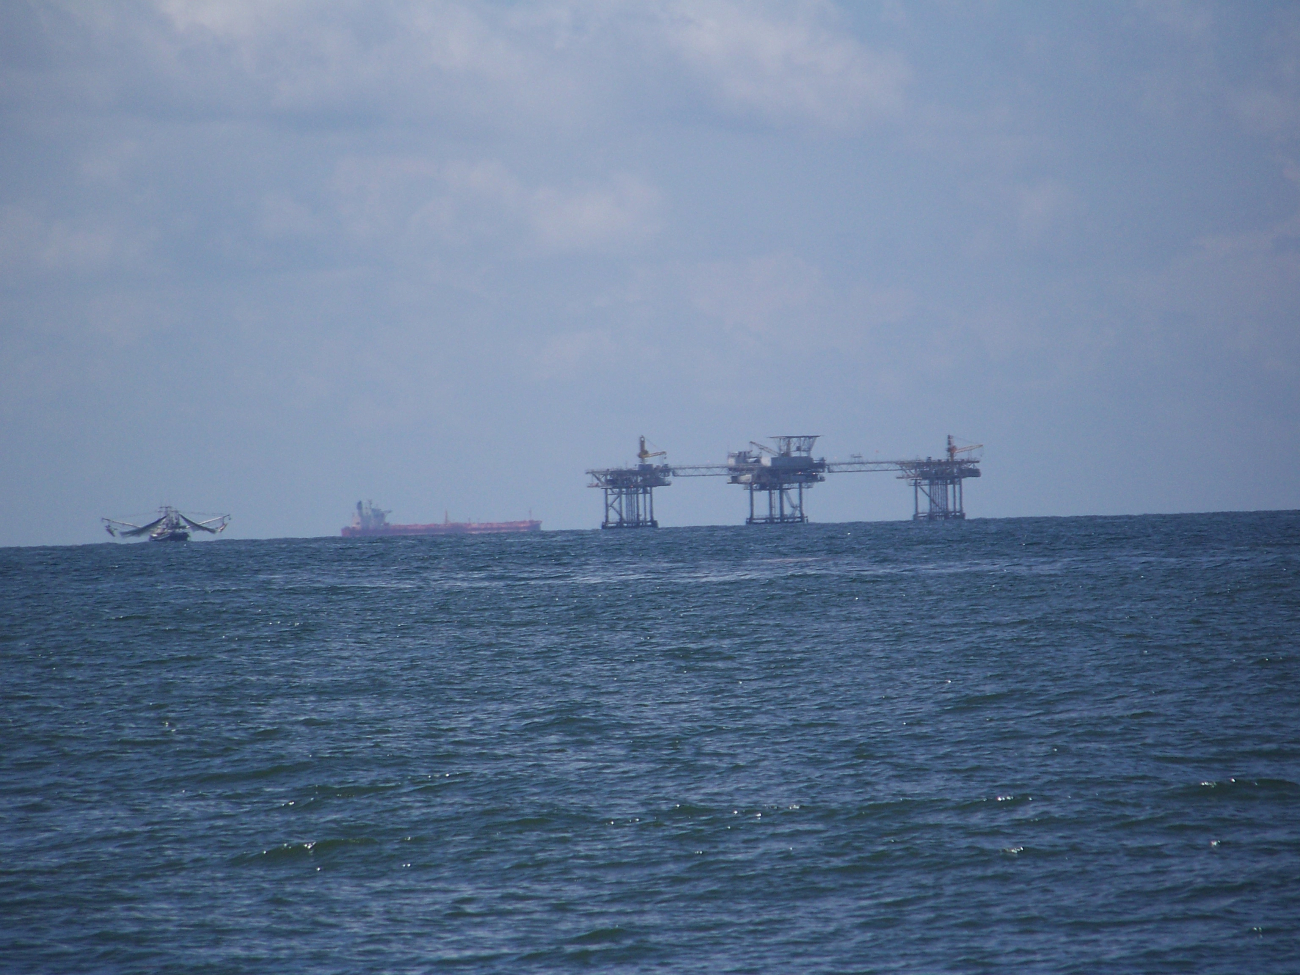 The Gulf of Mexico -  Oil platforms, tankers, and fishing vessels